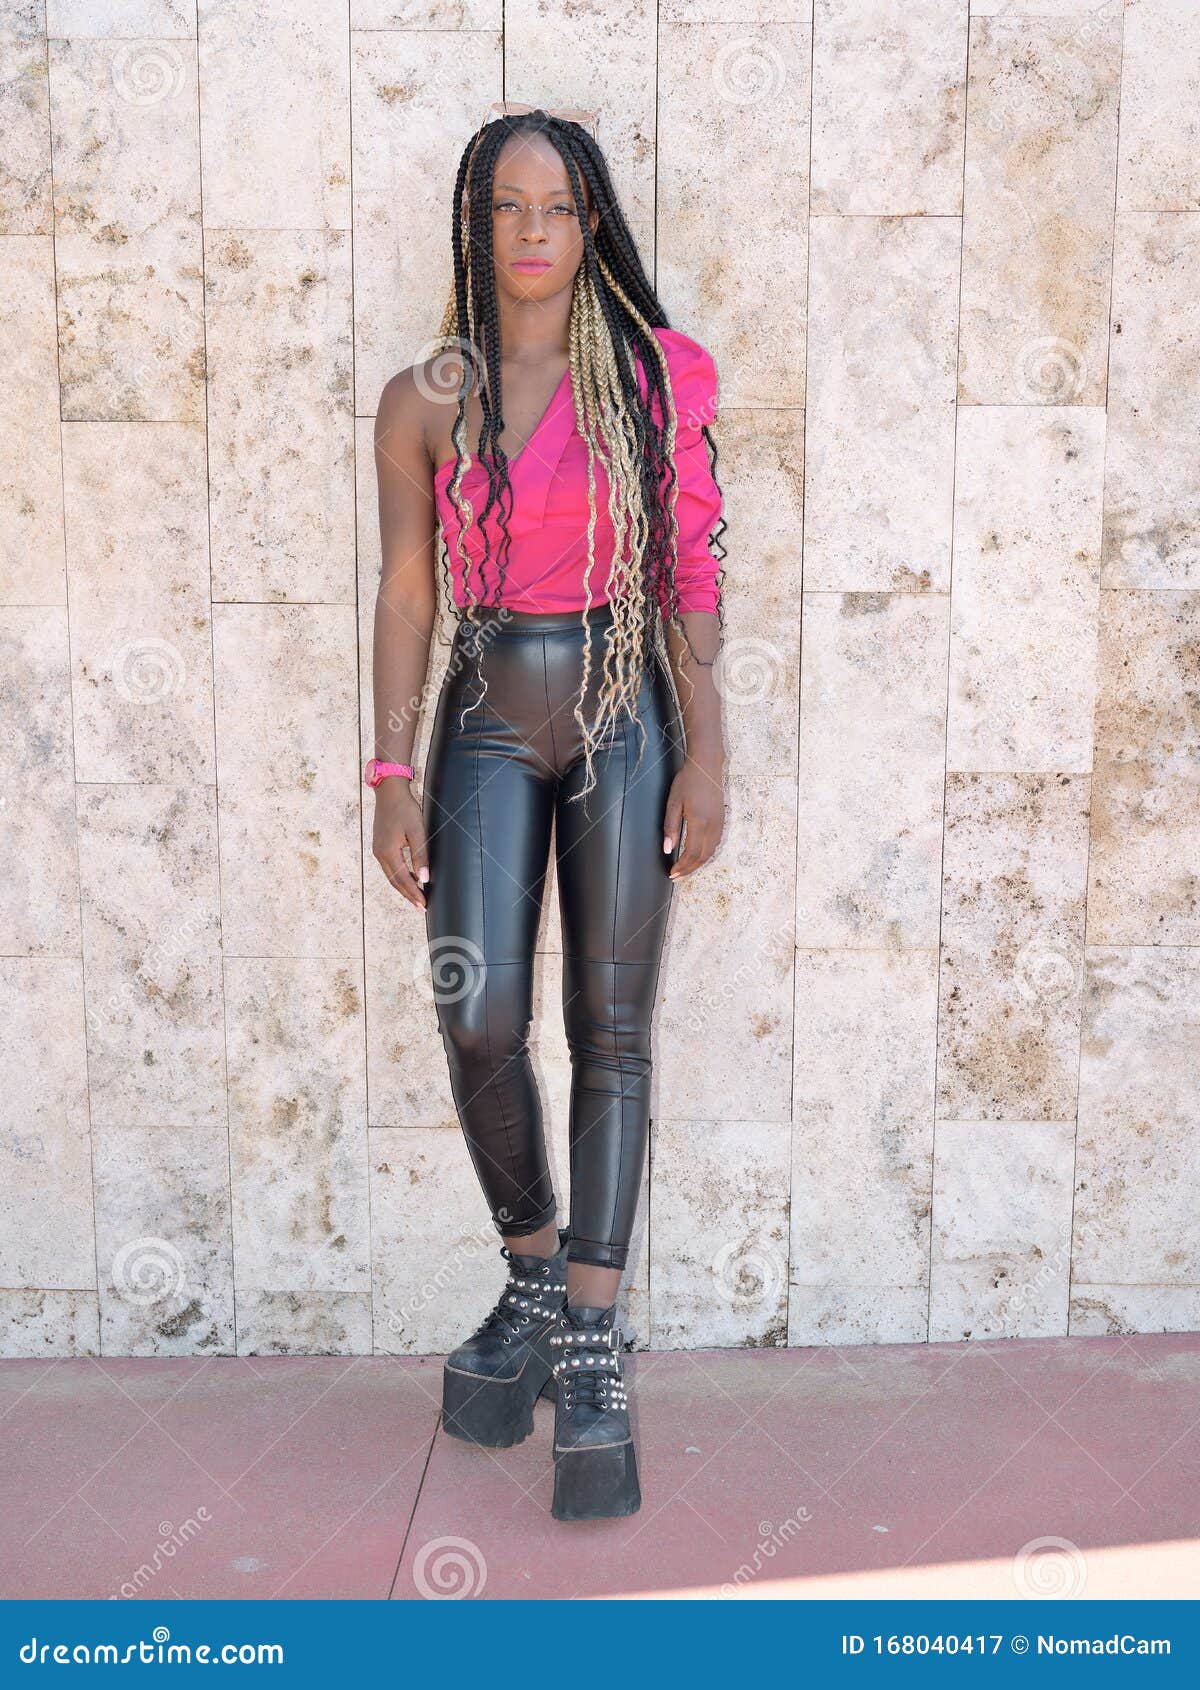 https://thumbs.dreamstime.com/z/afro-style-black-girl-long-blondes-braids-wearing-big-shoes-leather-pants-sunglasses-rests-wall-looks-camera-168040417.jpg